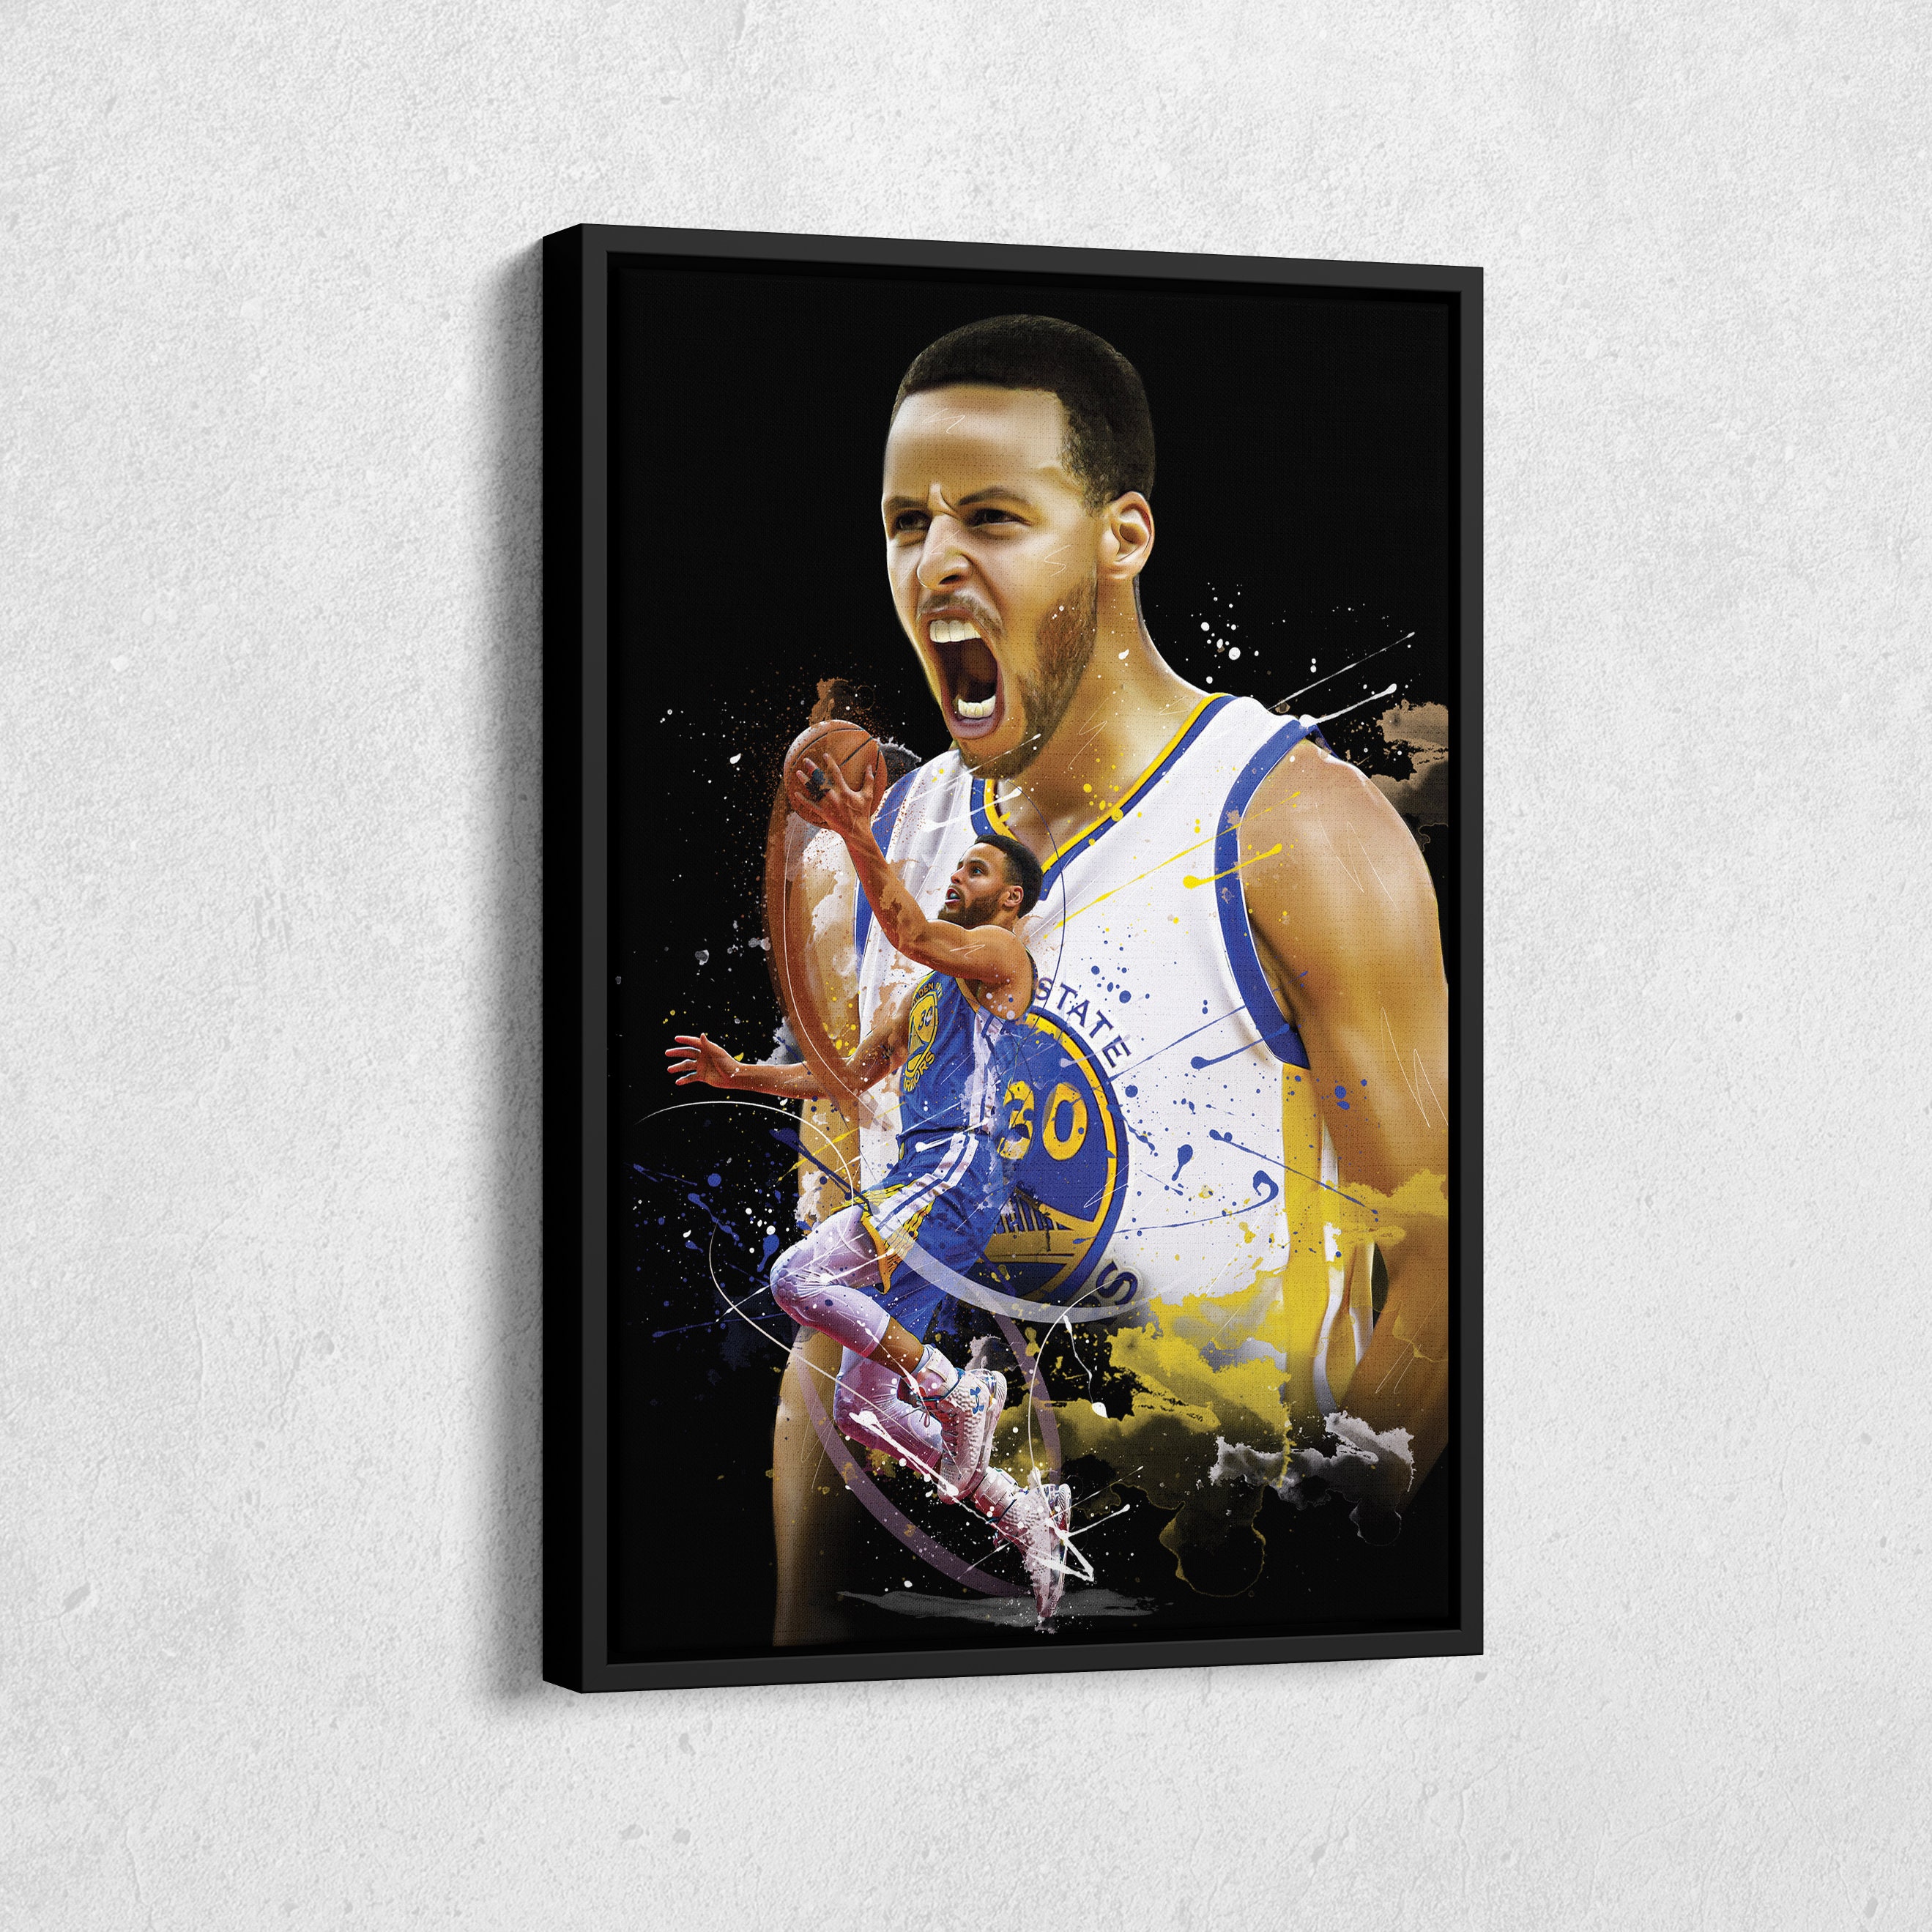 Kitbags & Lockers 12x8 A4 Stephen Curry Golden State Warriors Autographed Signed Photo Photograph Picture Frame Basketball Poster Gift G, Black